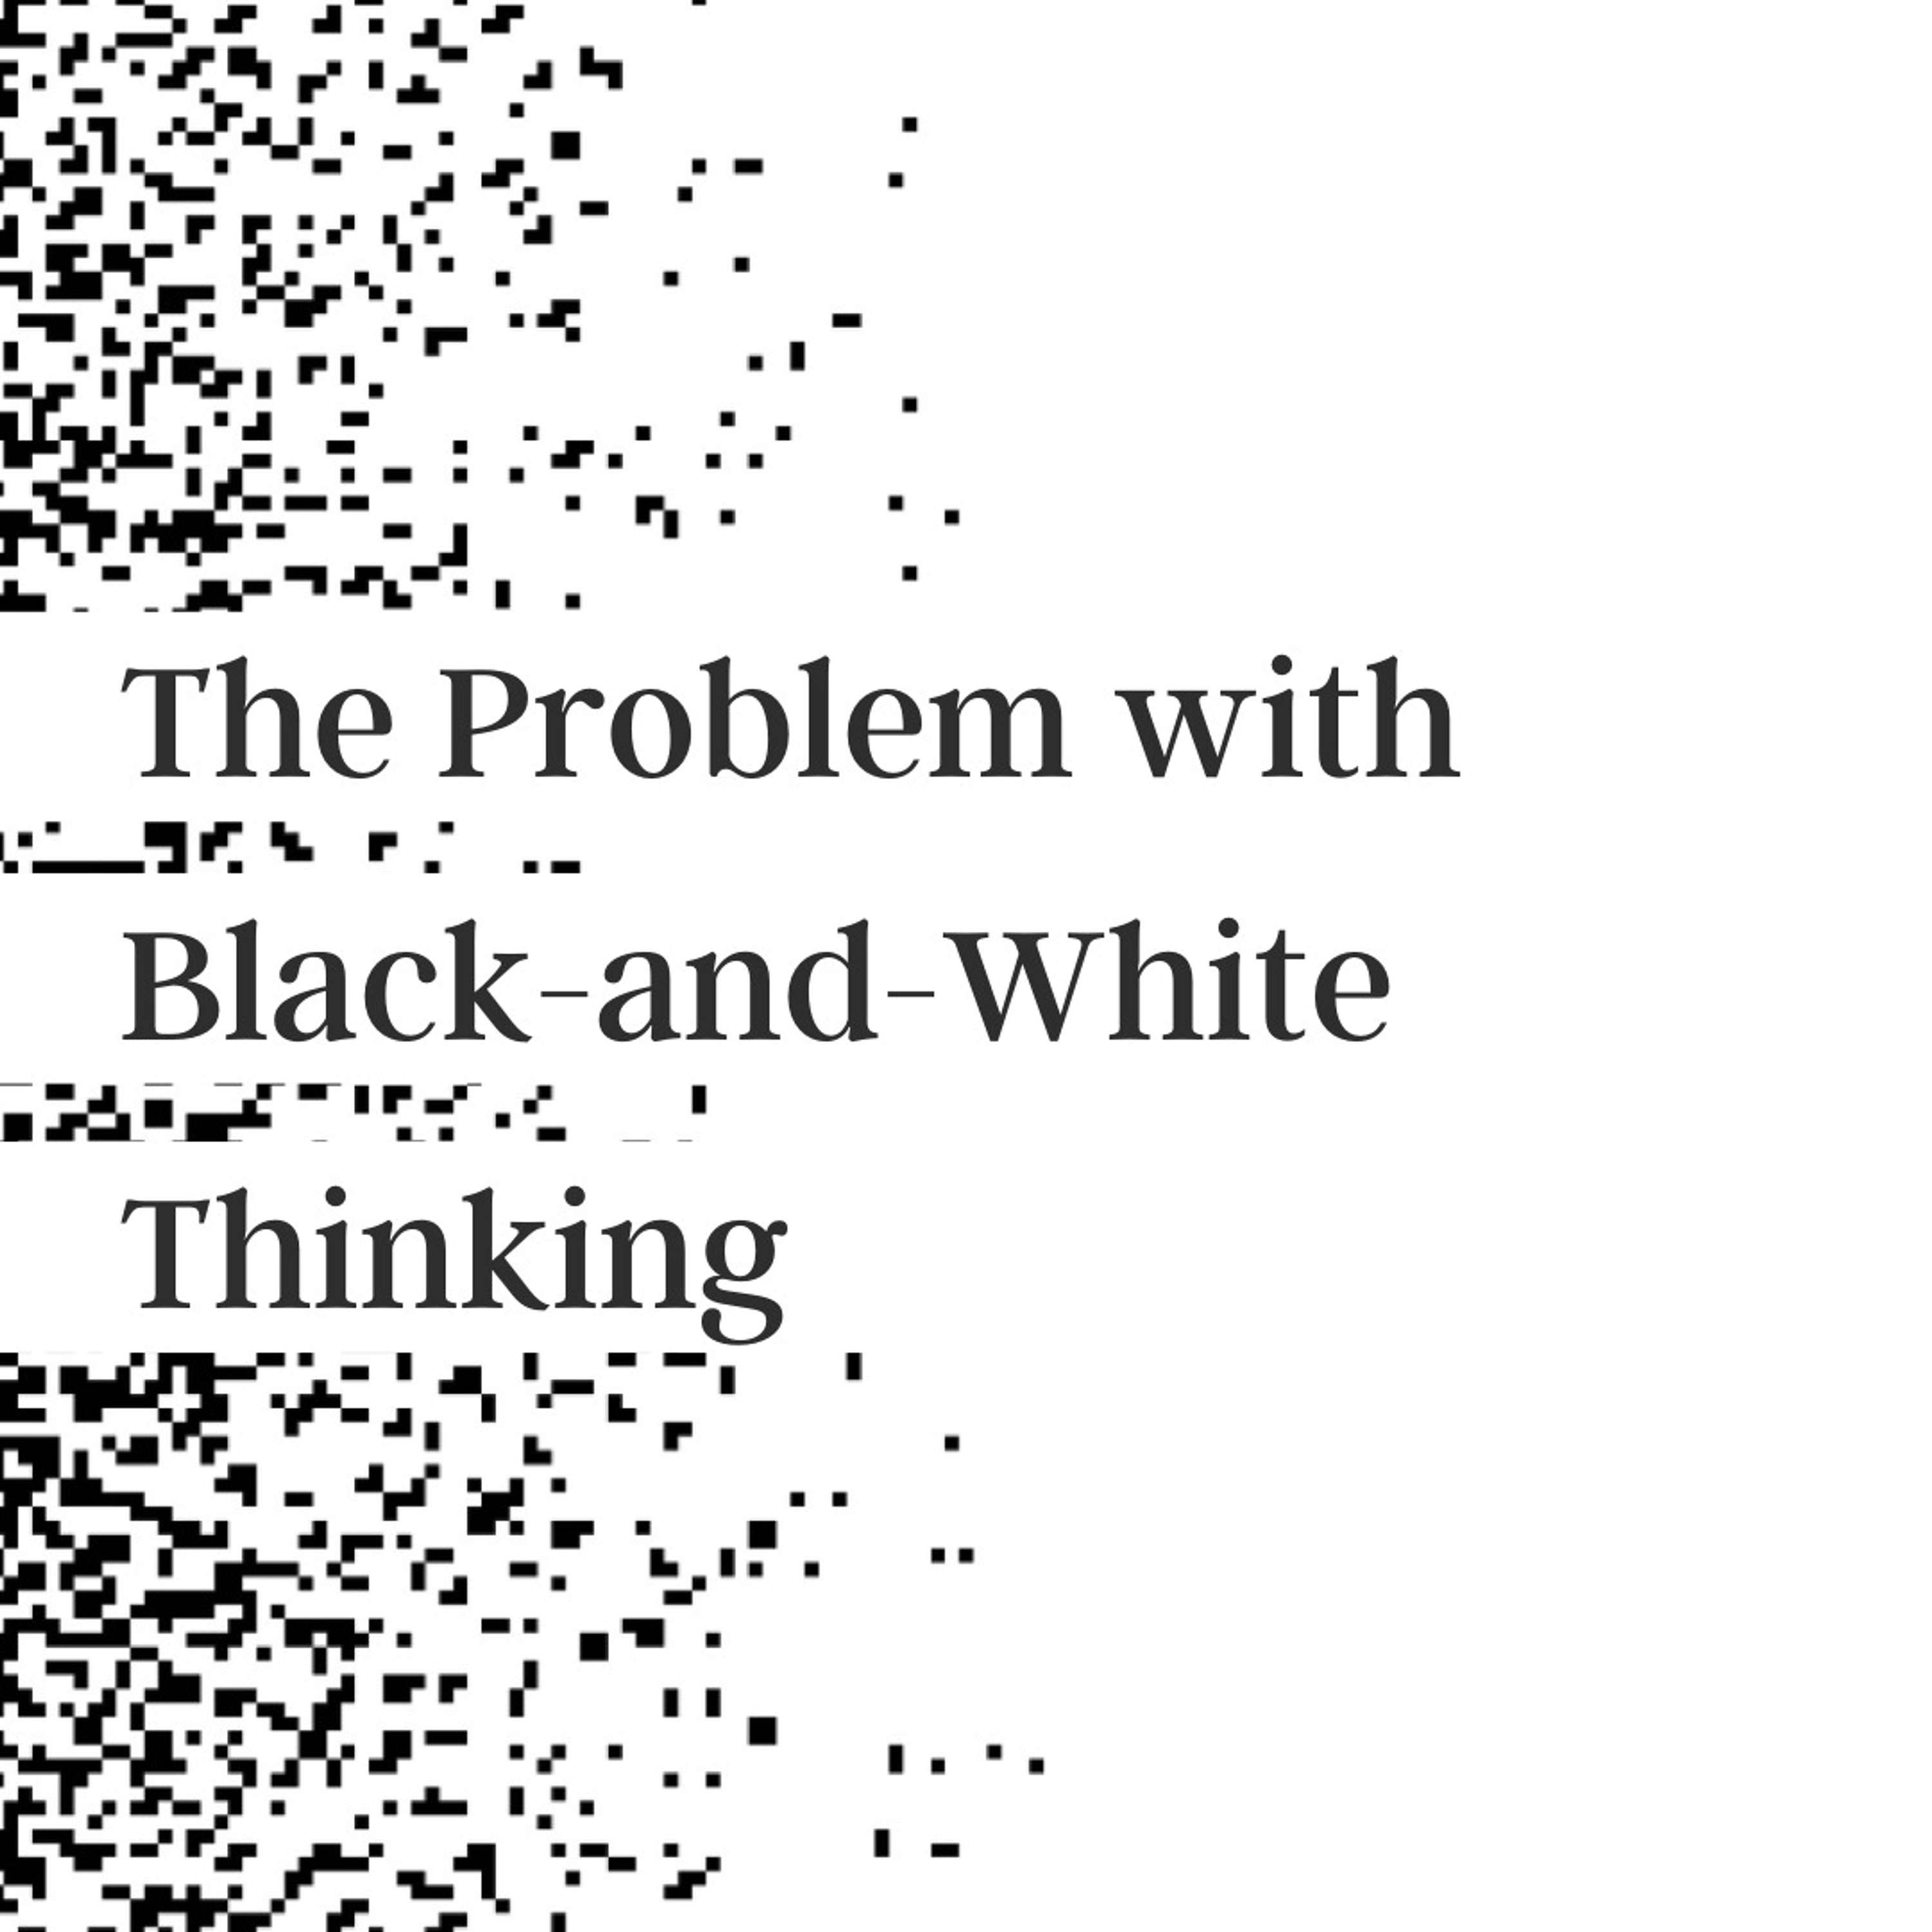 30. The Problem with Black-and-White Thinking